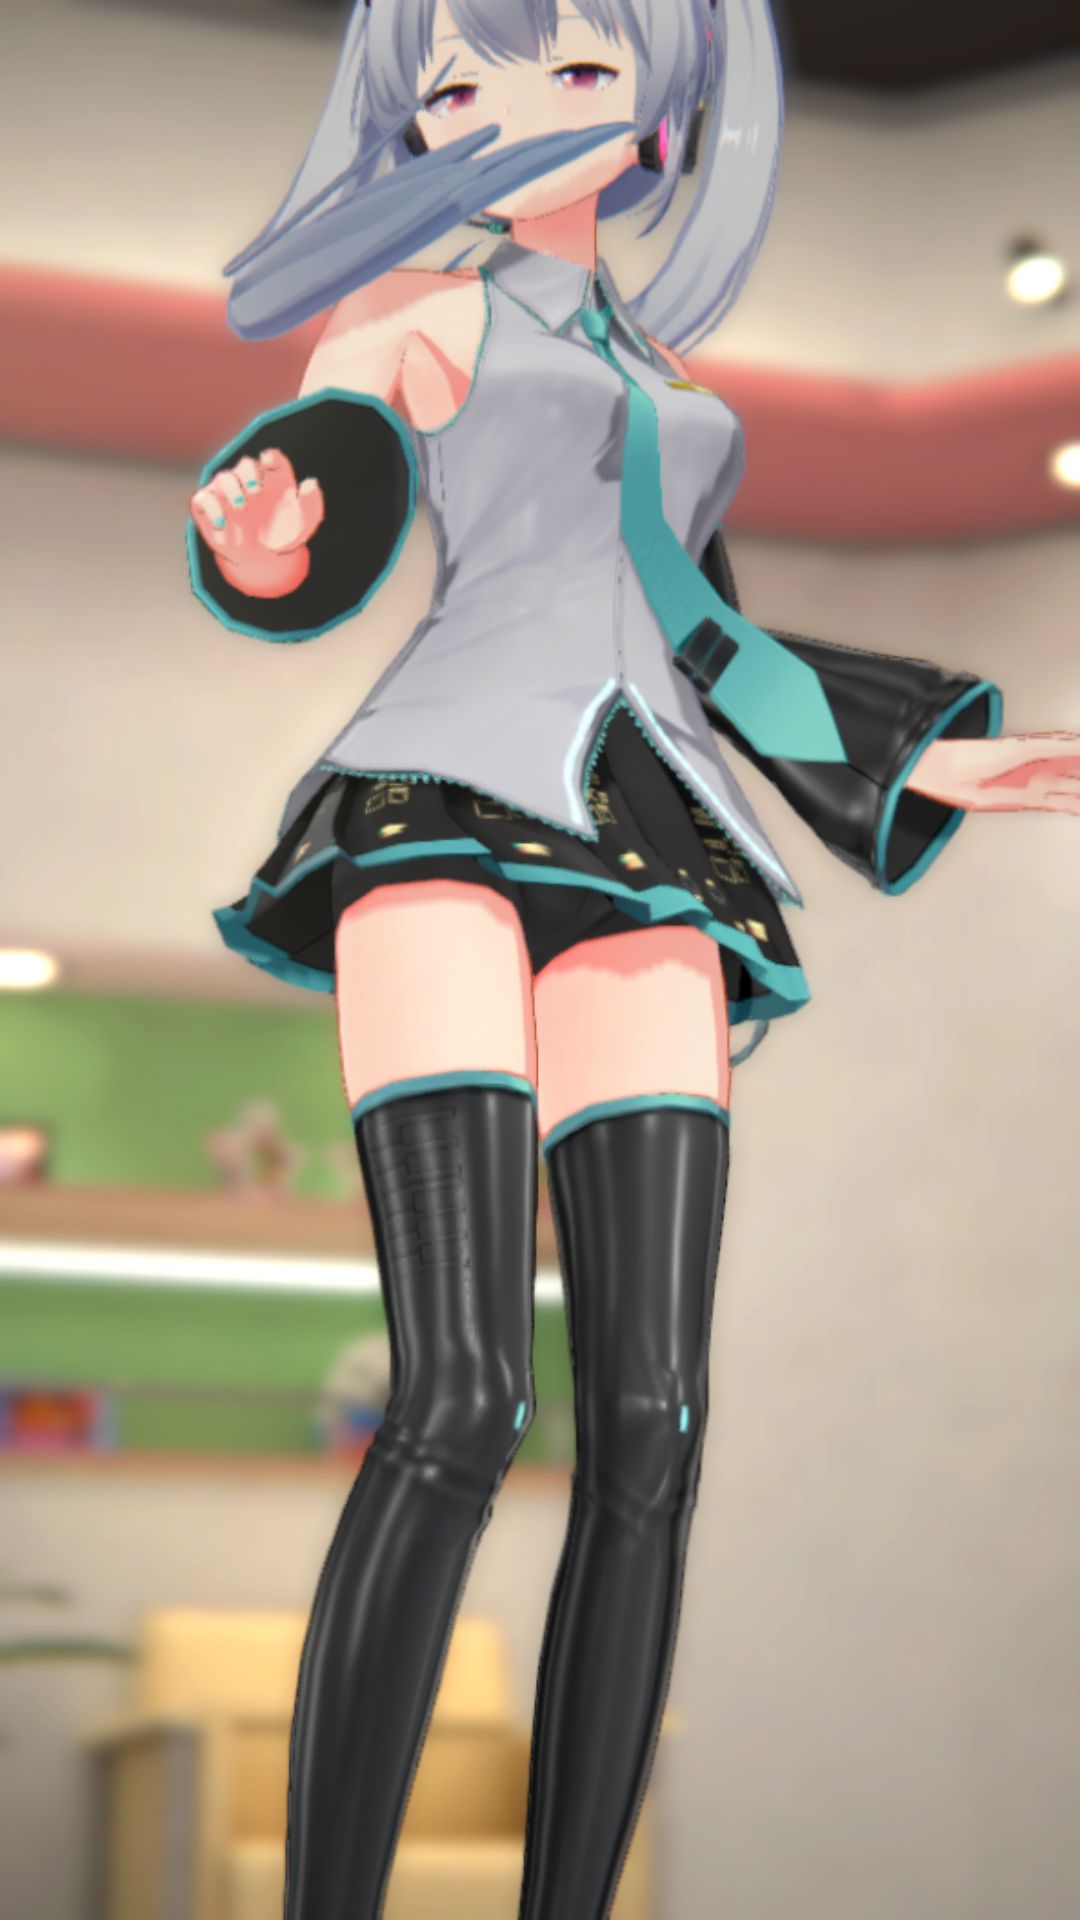 The result of peeking into the contents of the skirt of the smartphone game "IDOLY PRIDE" Hatsune Miku and Hatsune Miku costume 4